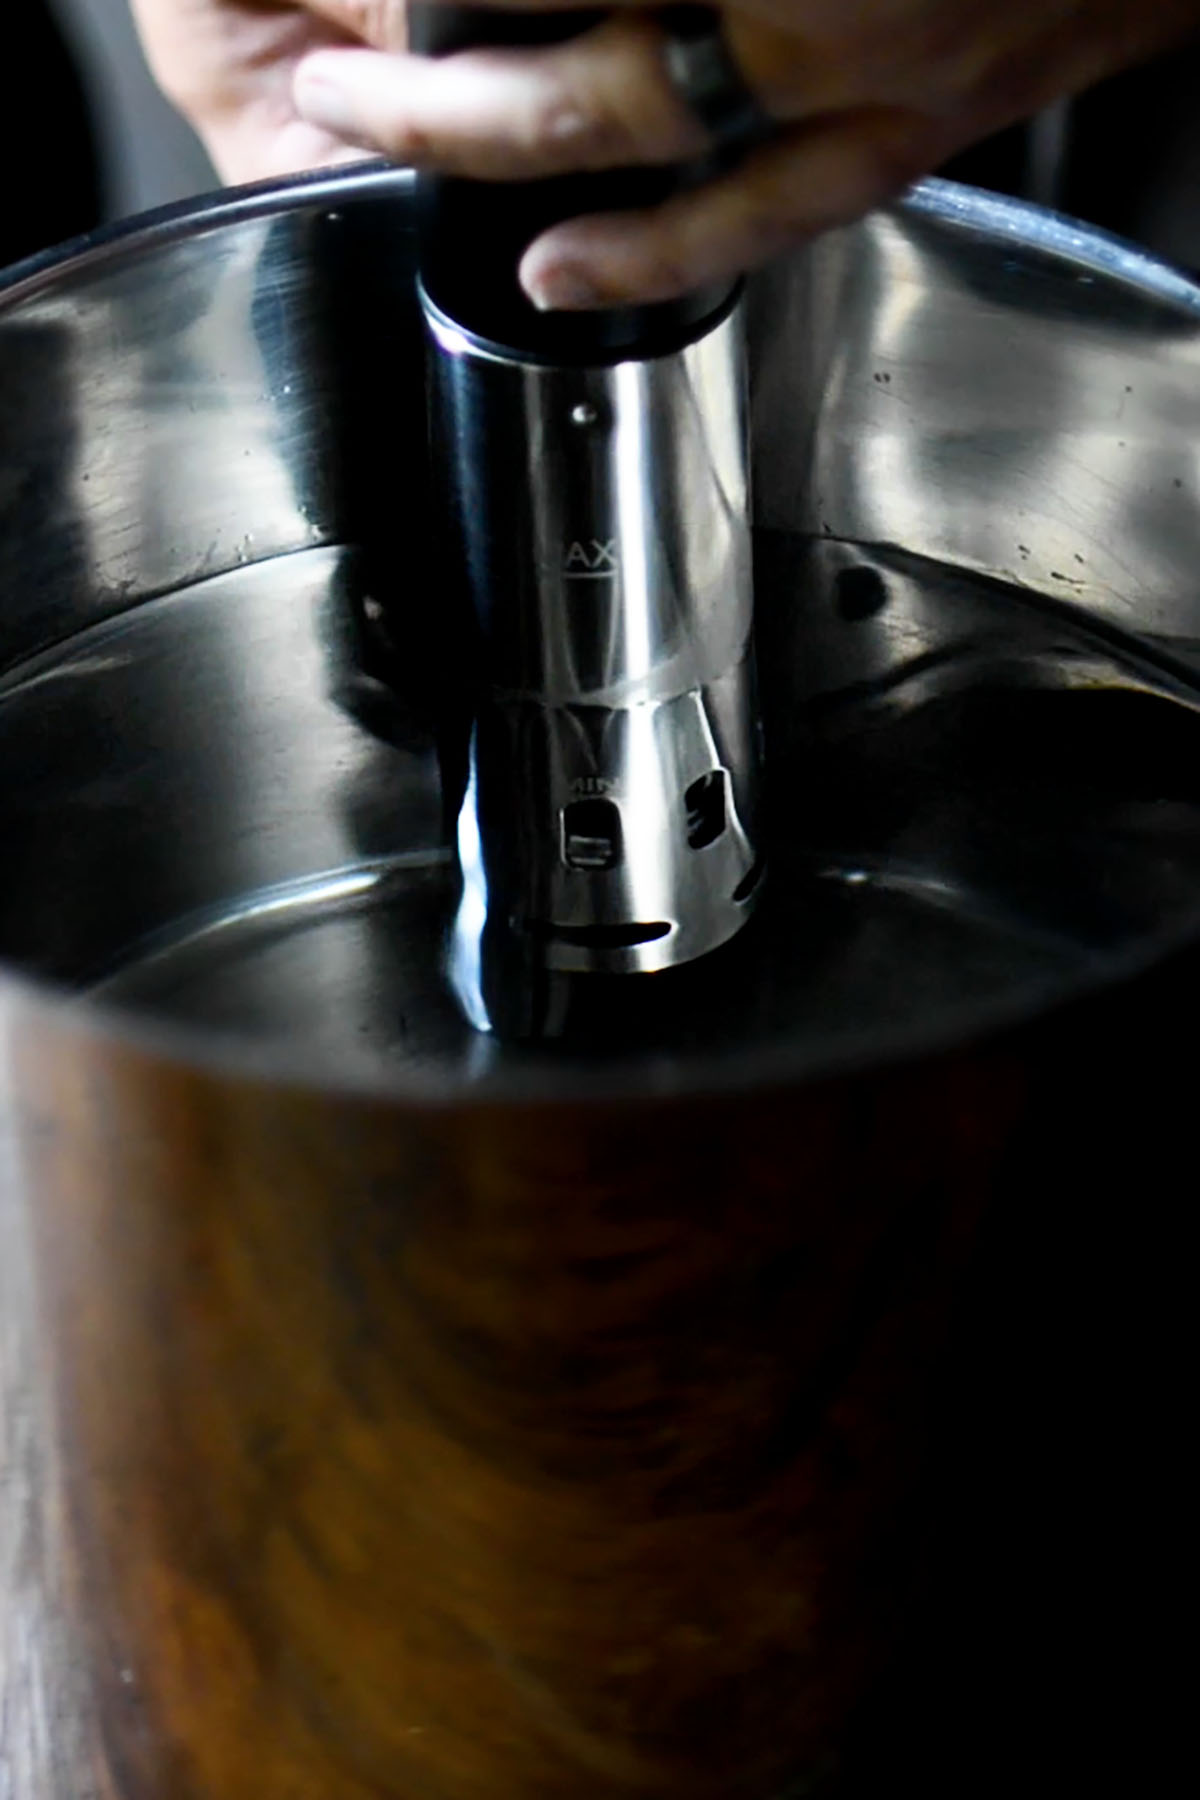 A sous vide circulator being attached to a pot of water.